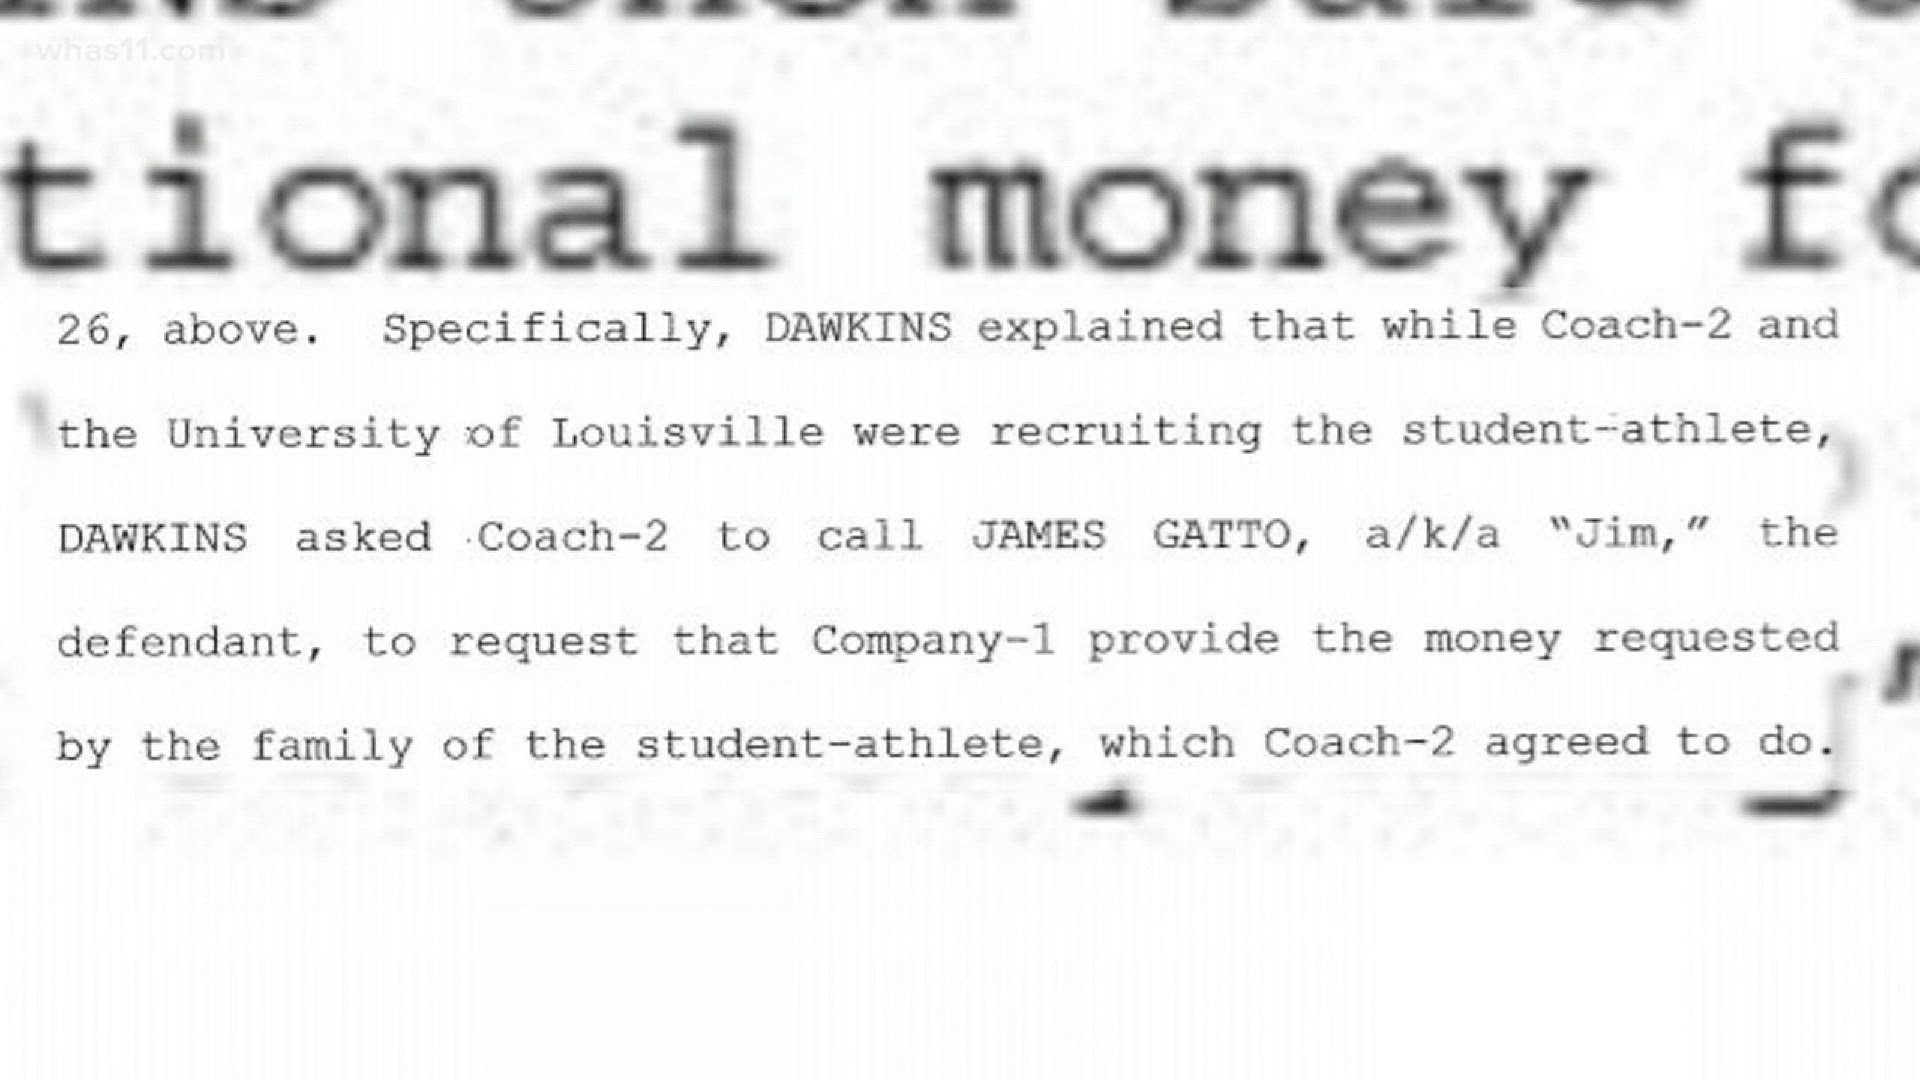 Rick Pitino's attorney refutes claims that the most recent NCAA indictment directly implicates his client